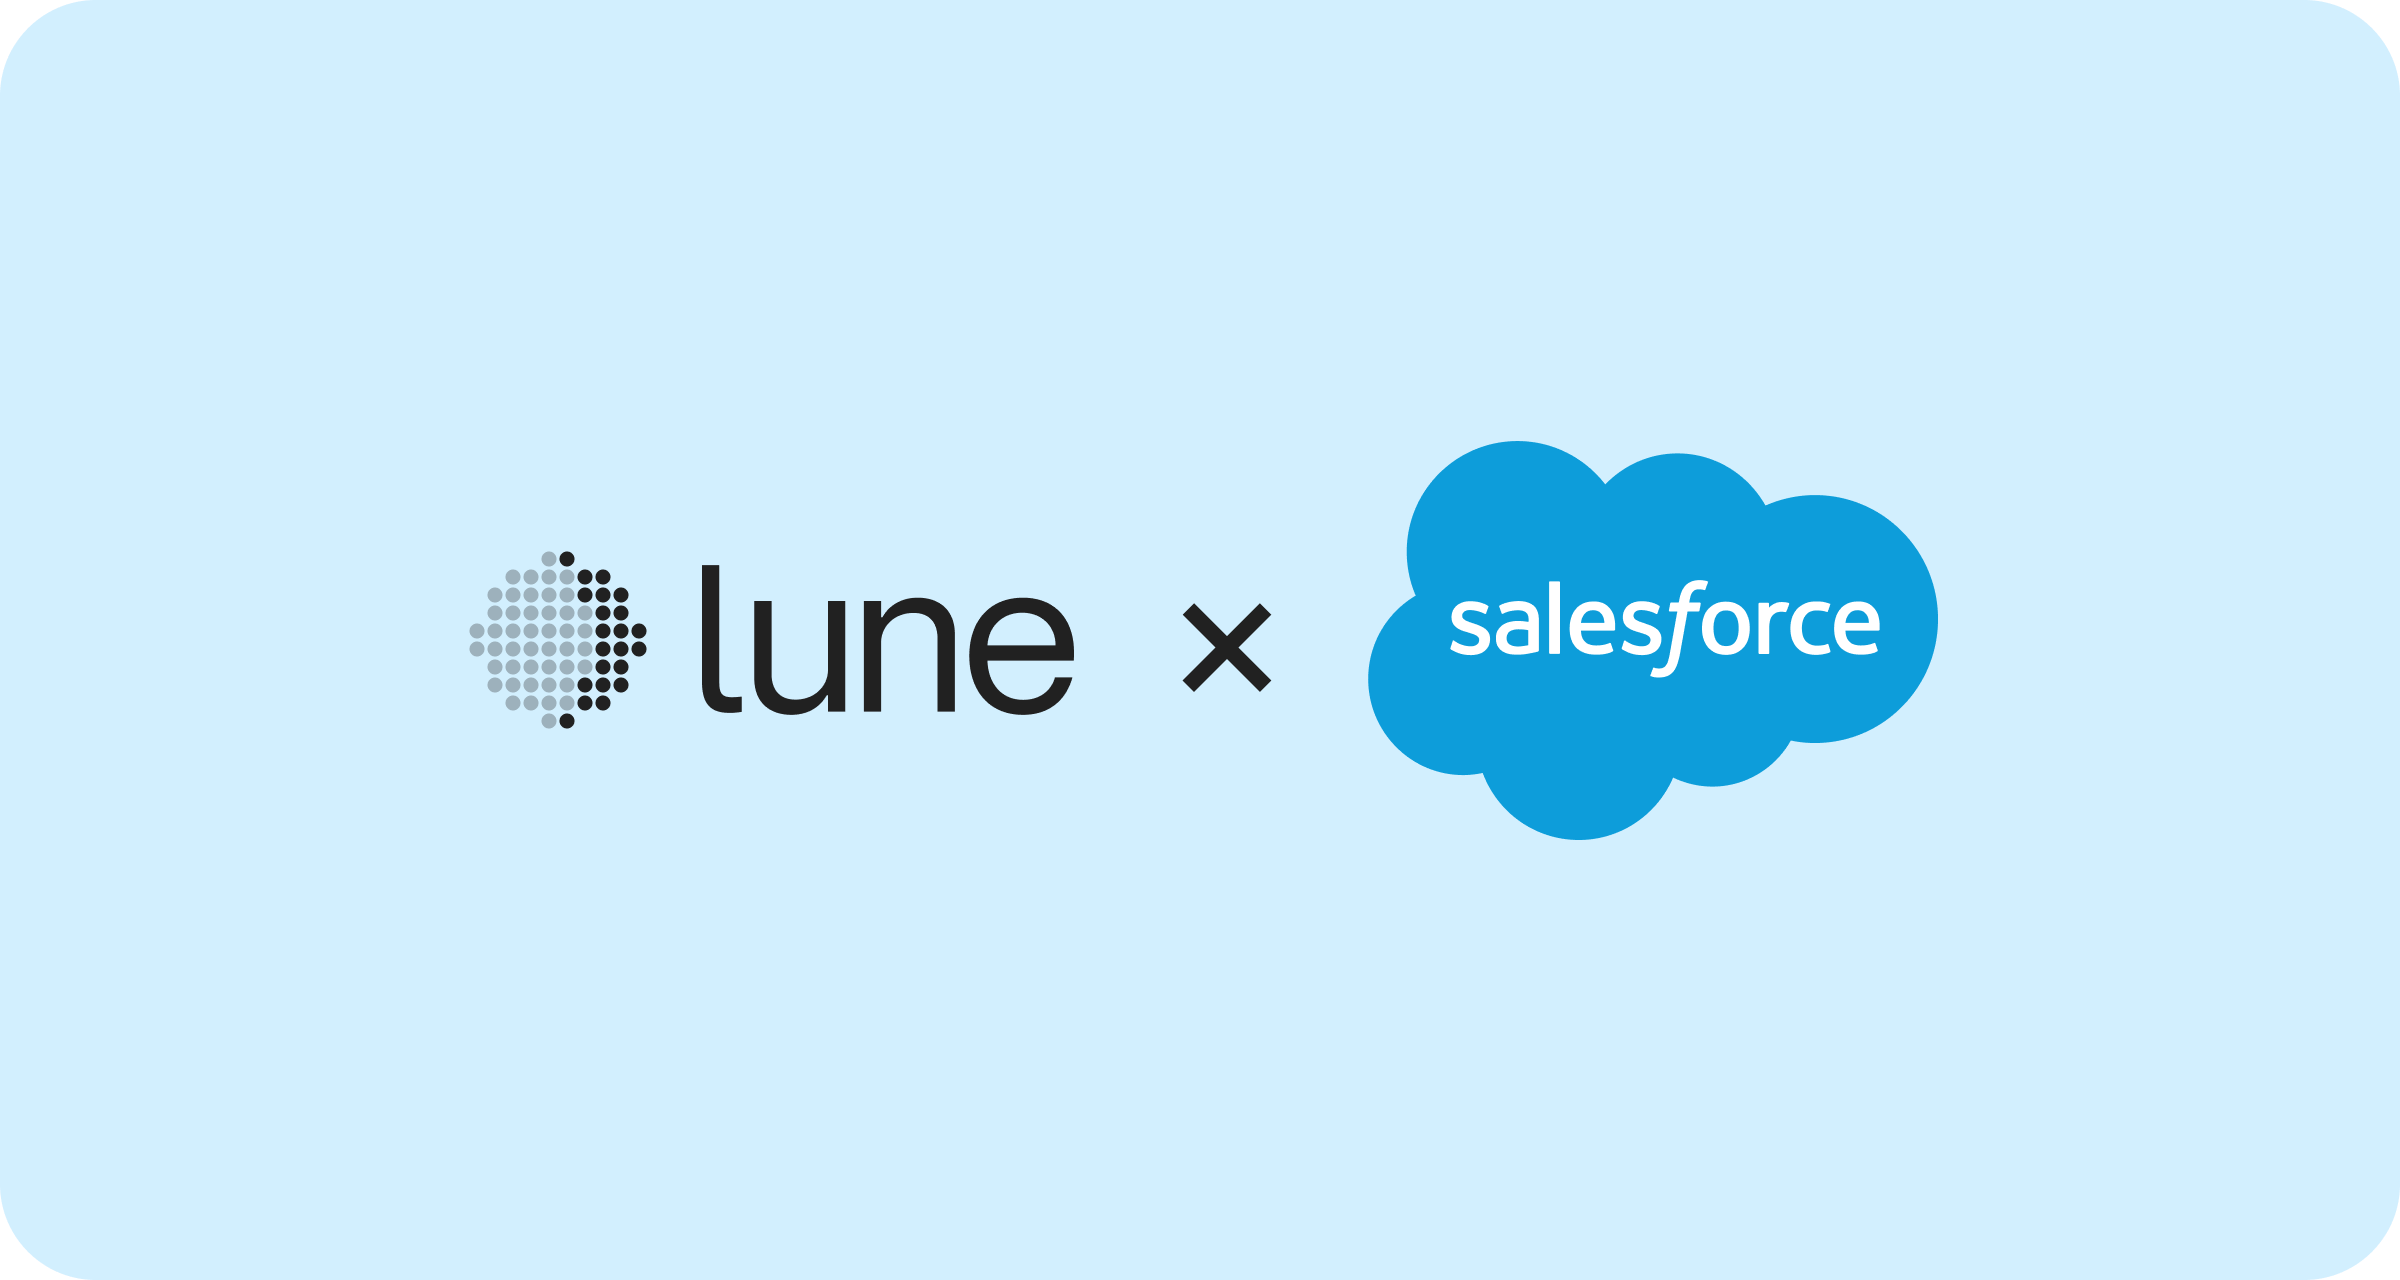 Salesforce partners with Lune